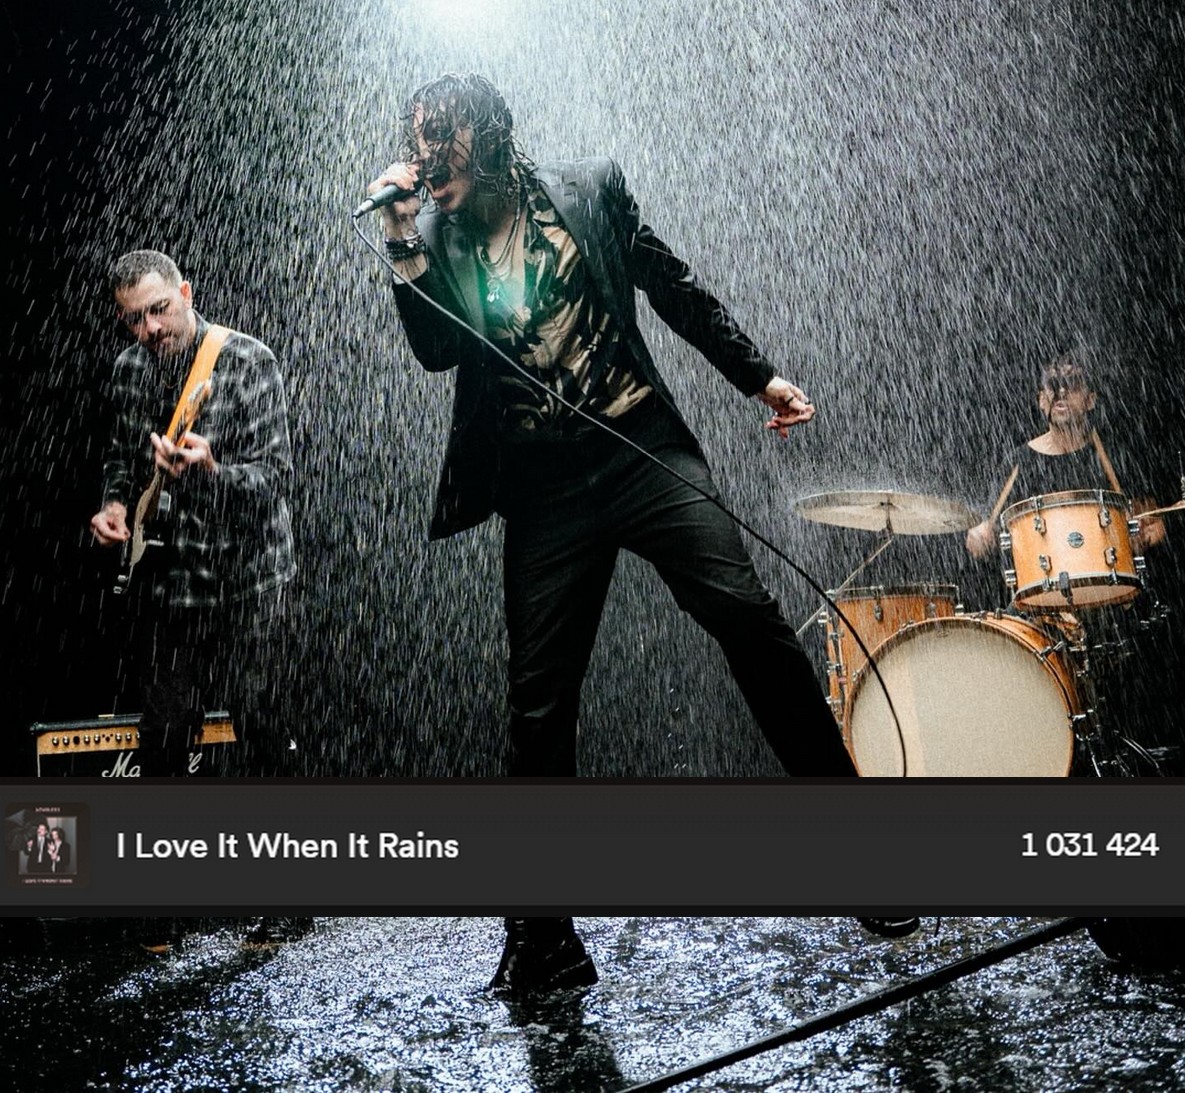 Just 22 days after its release, I Love It When It Rains has become the fastest @thisisloveless original to reach the million streams 🥳